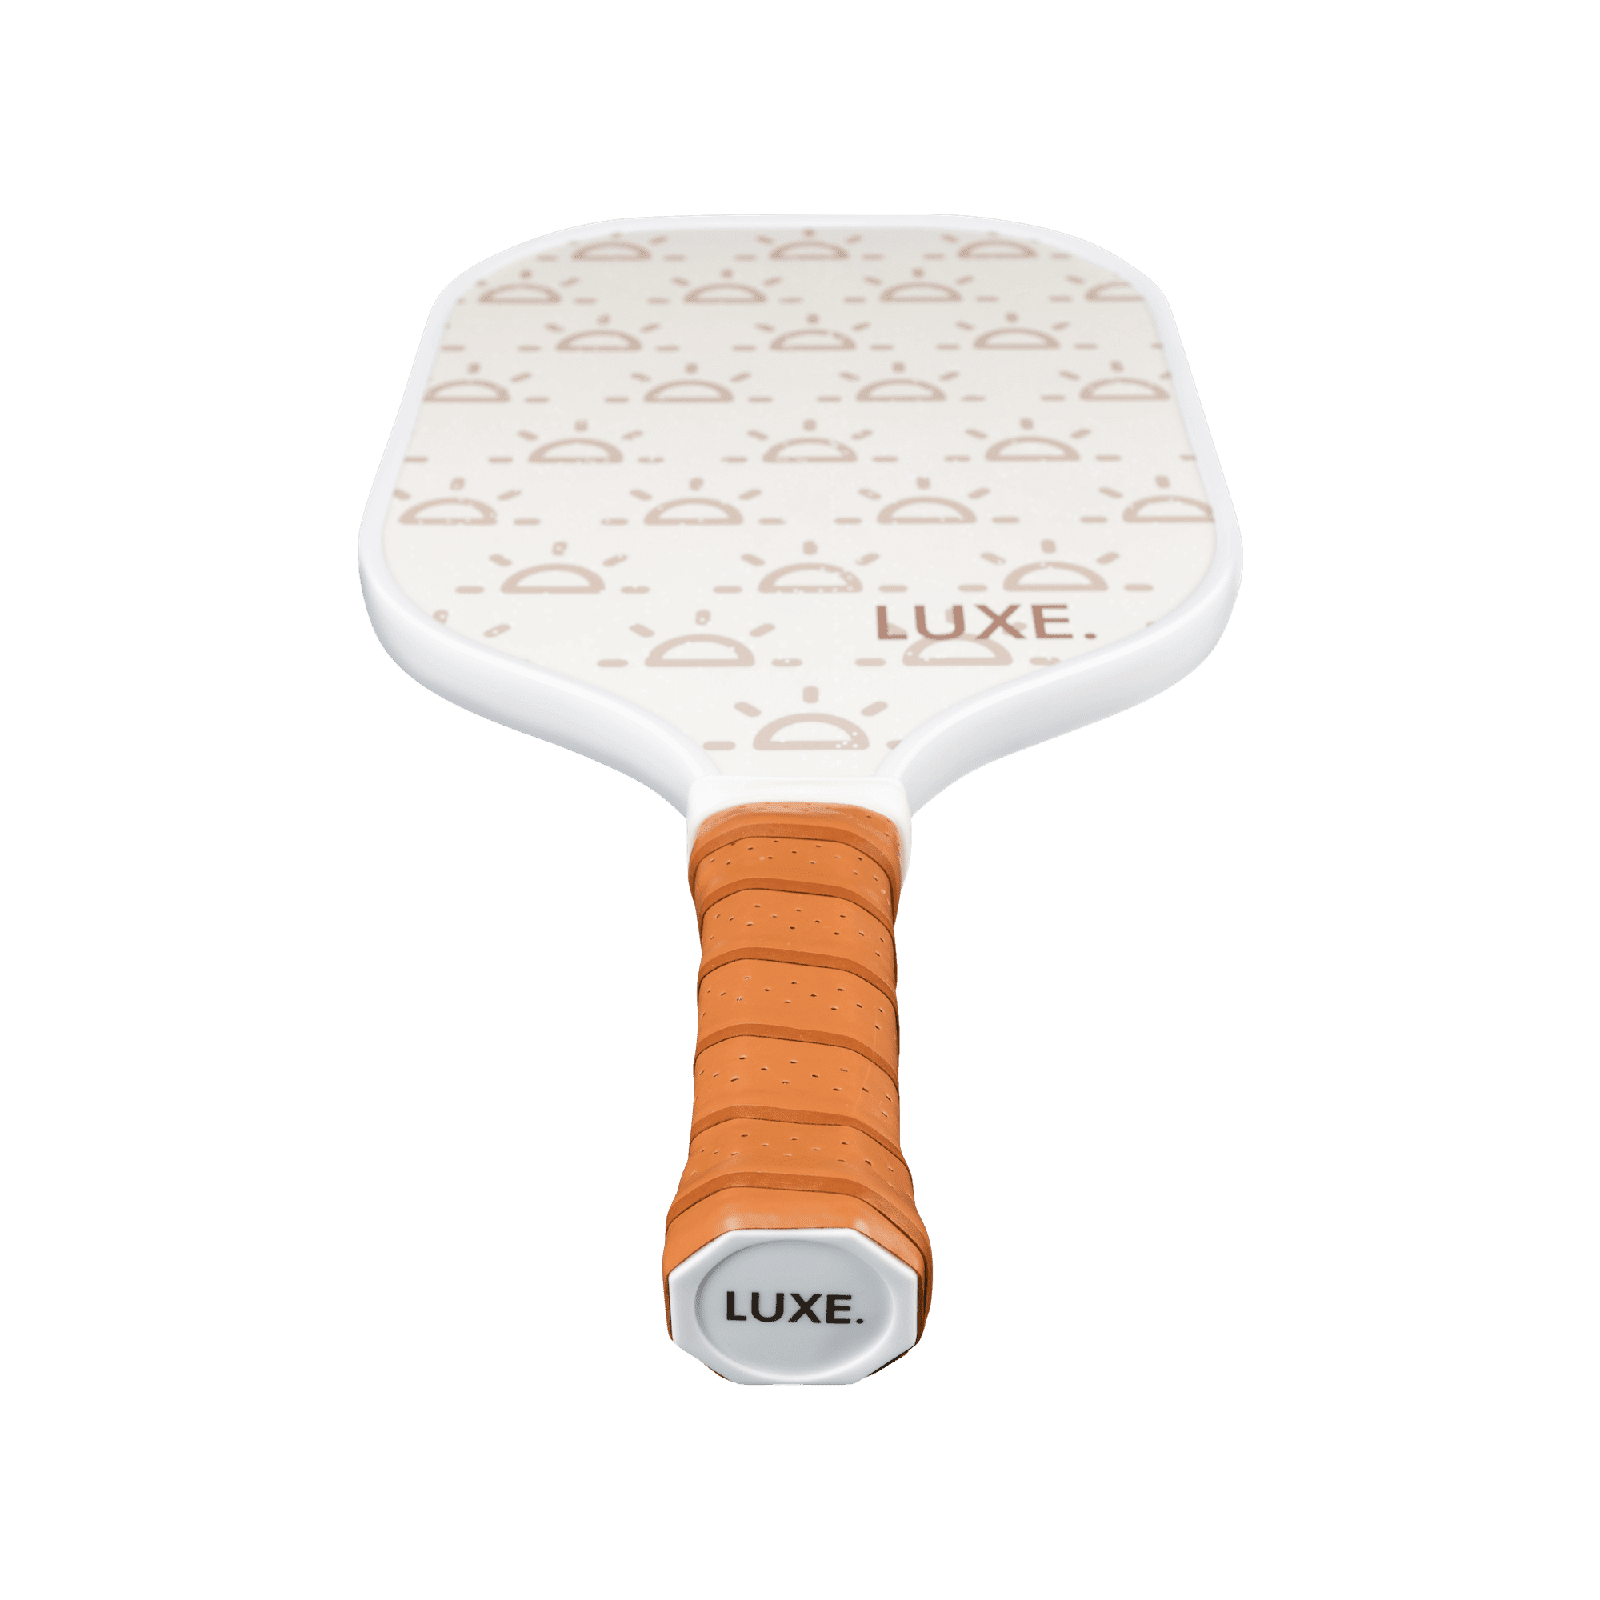 Suns LUXE Pickleball Paddle. Cute and aesthetic pickleball paddles